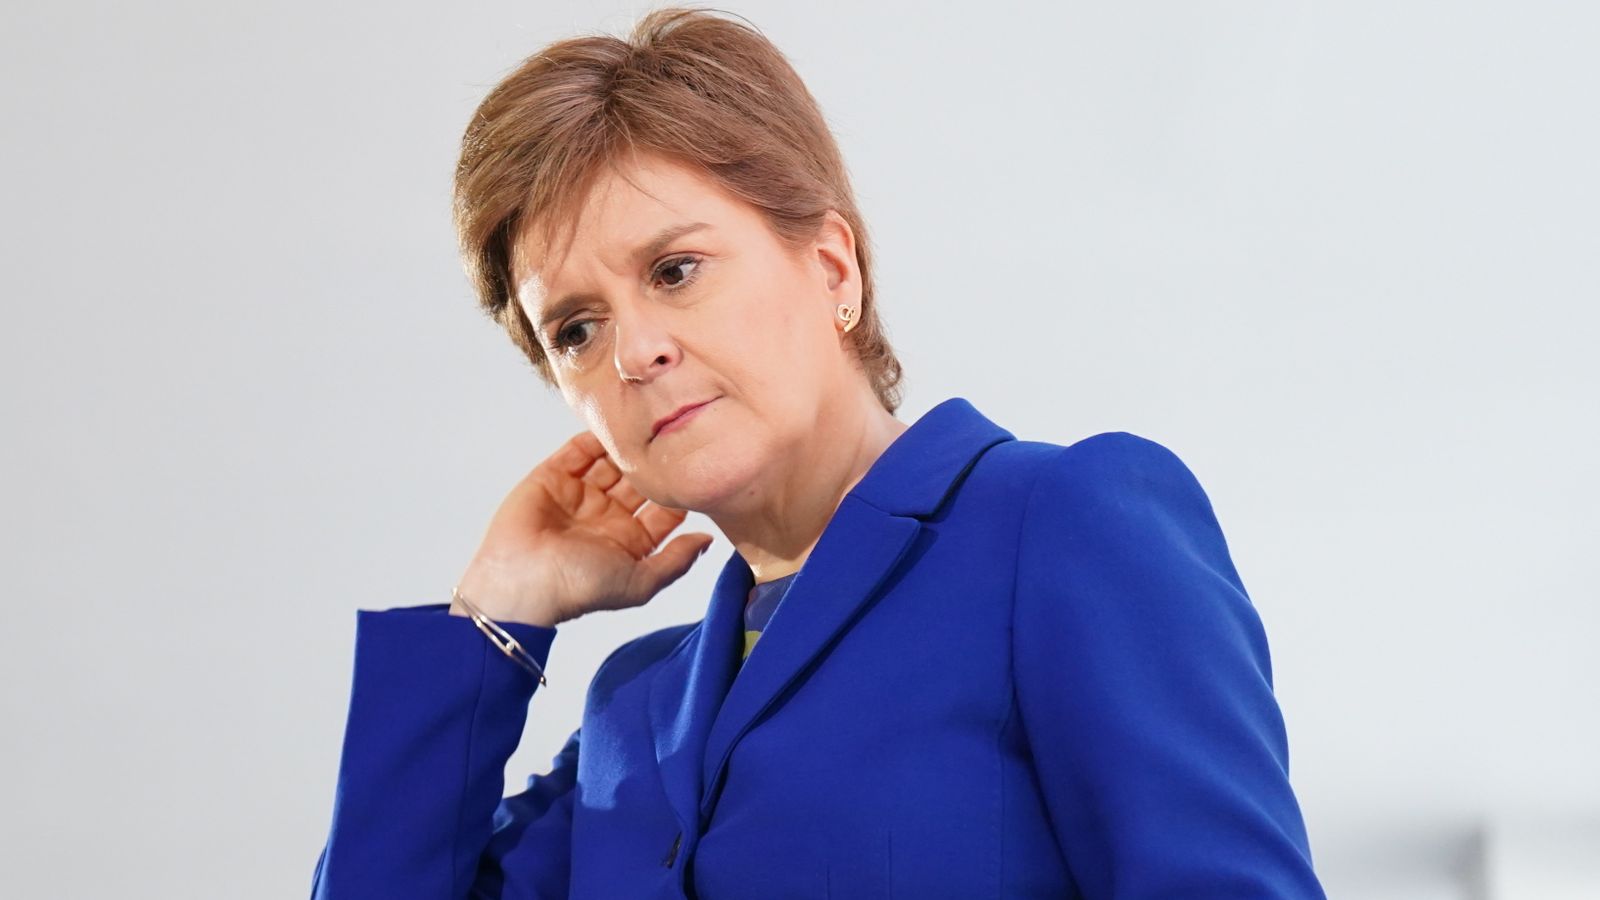 Race to replace Sturgeon as leader under way with SNP ruling committee set to meet to work out succession timetable